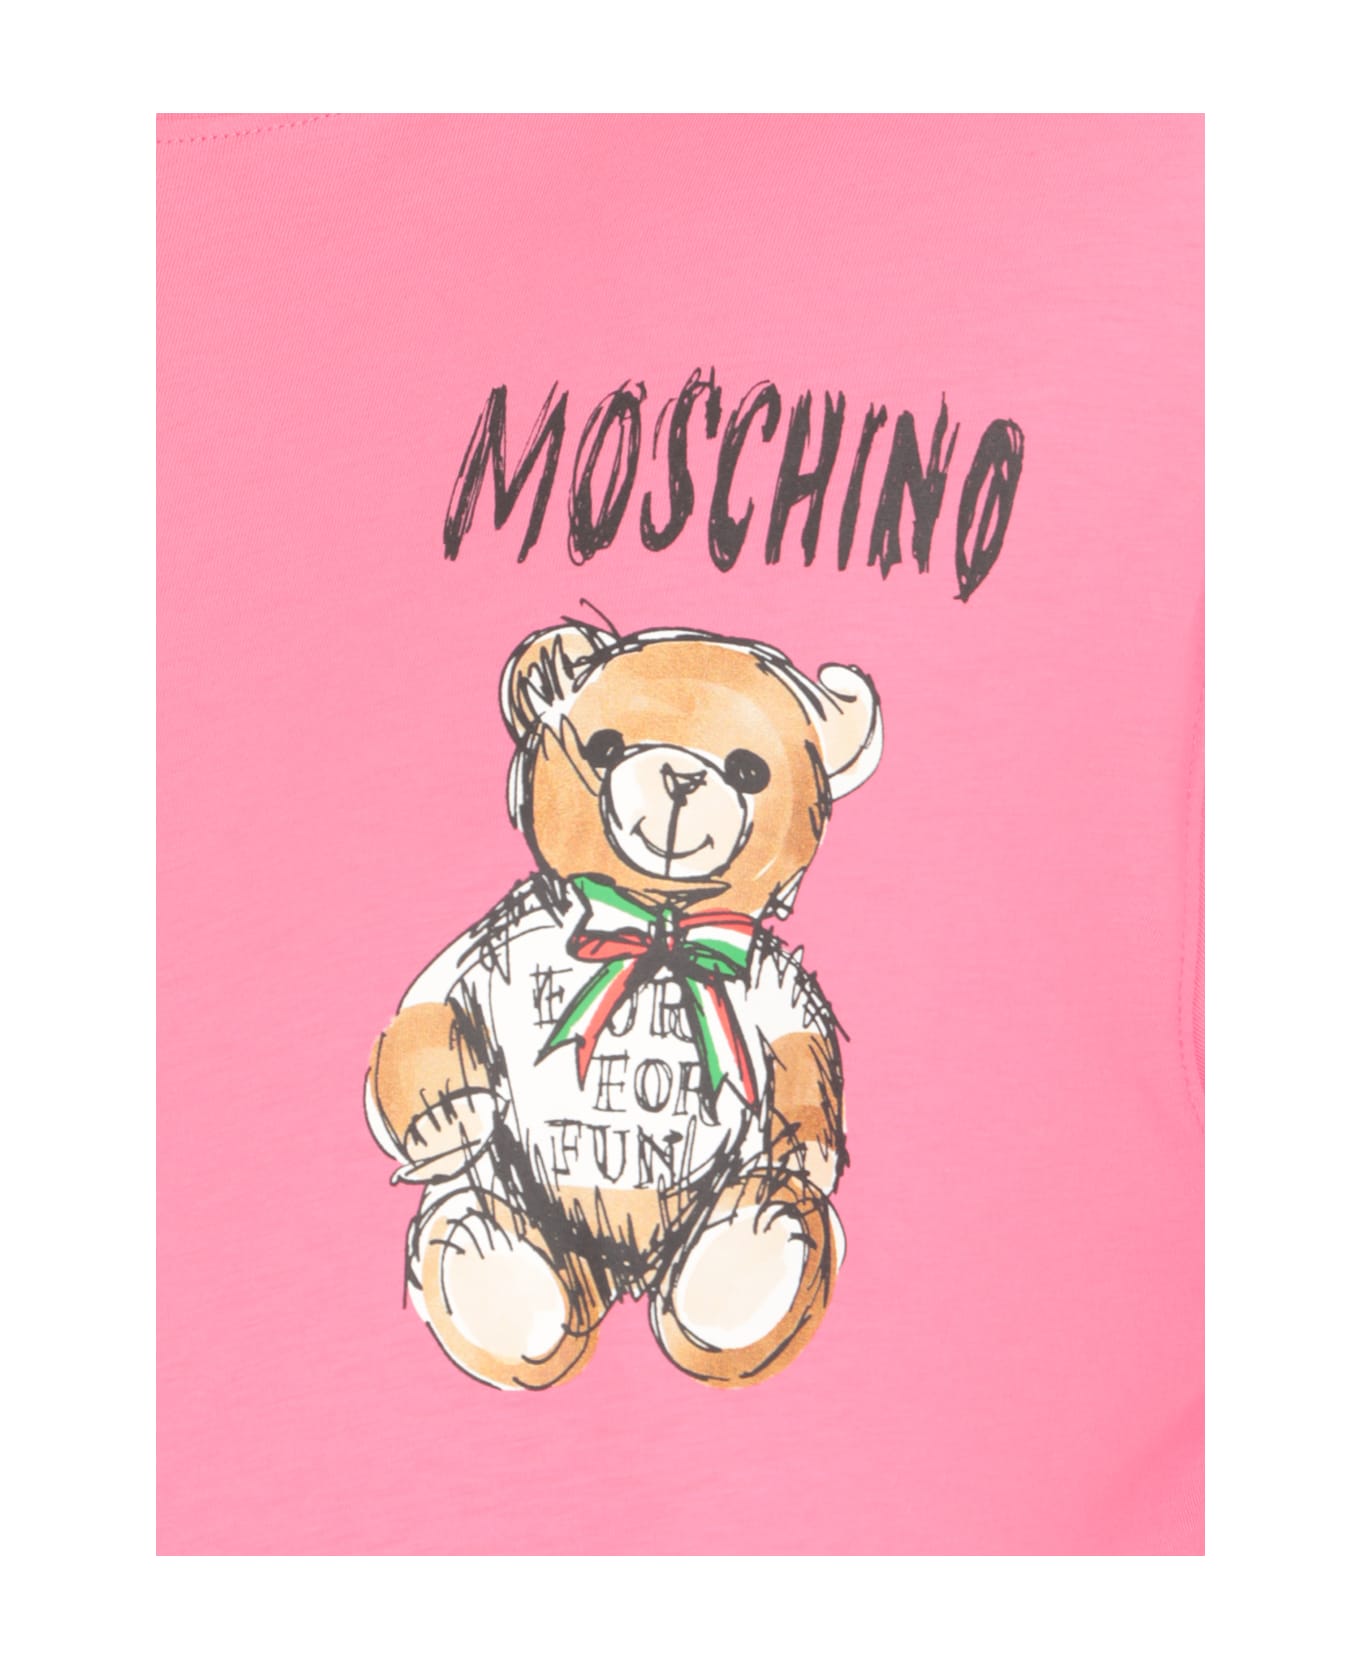 Moschino T-shirt With Logo - Pink